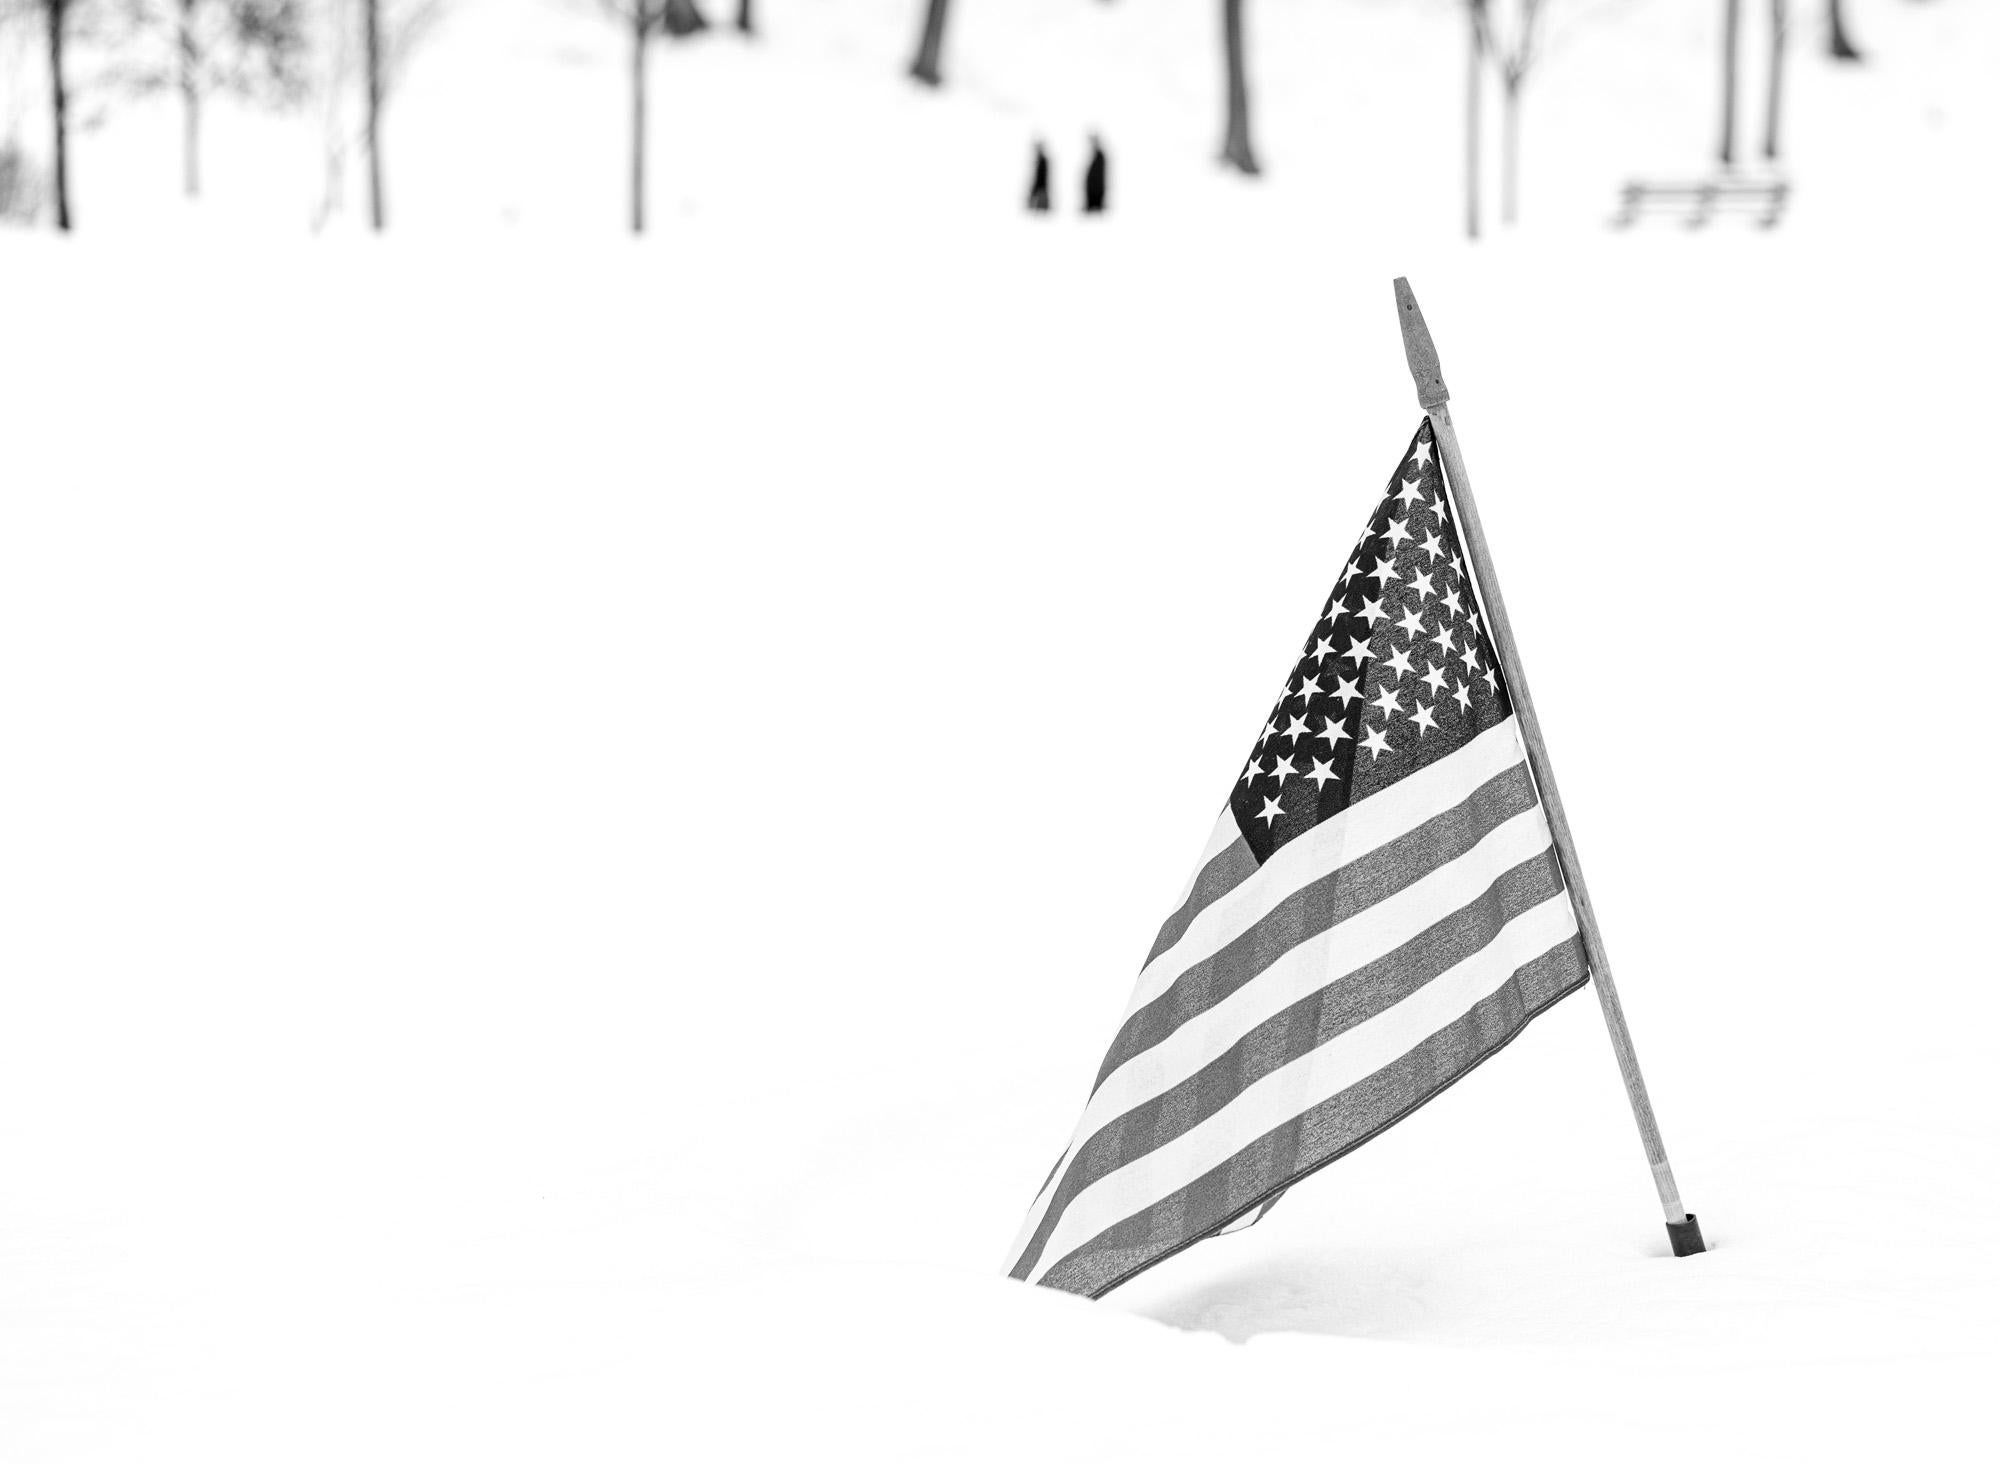 Howard Lewis Black and White Photograph - Black and White Limited Edition Photograph 2021 " American Winter " Patriotism